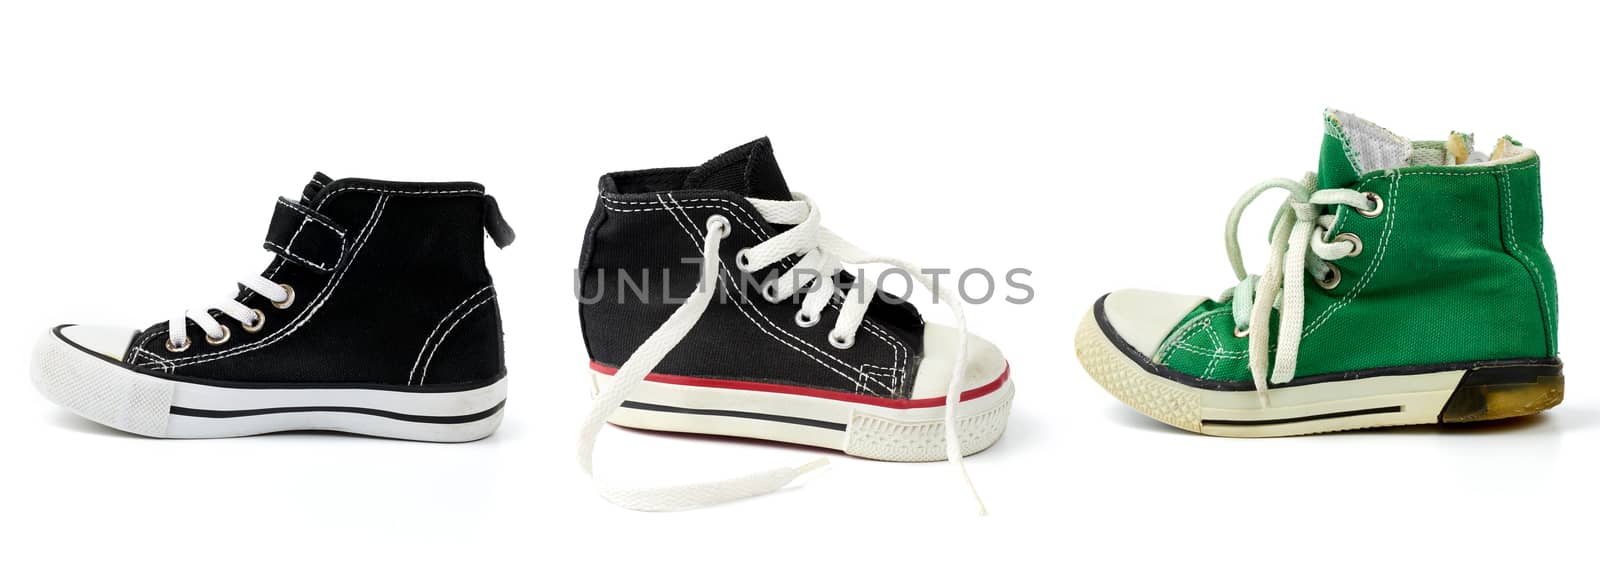 black, green textile sneakers  with white tied shoelaces on a white background, shoes stand sideways